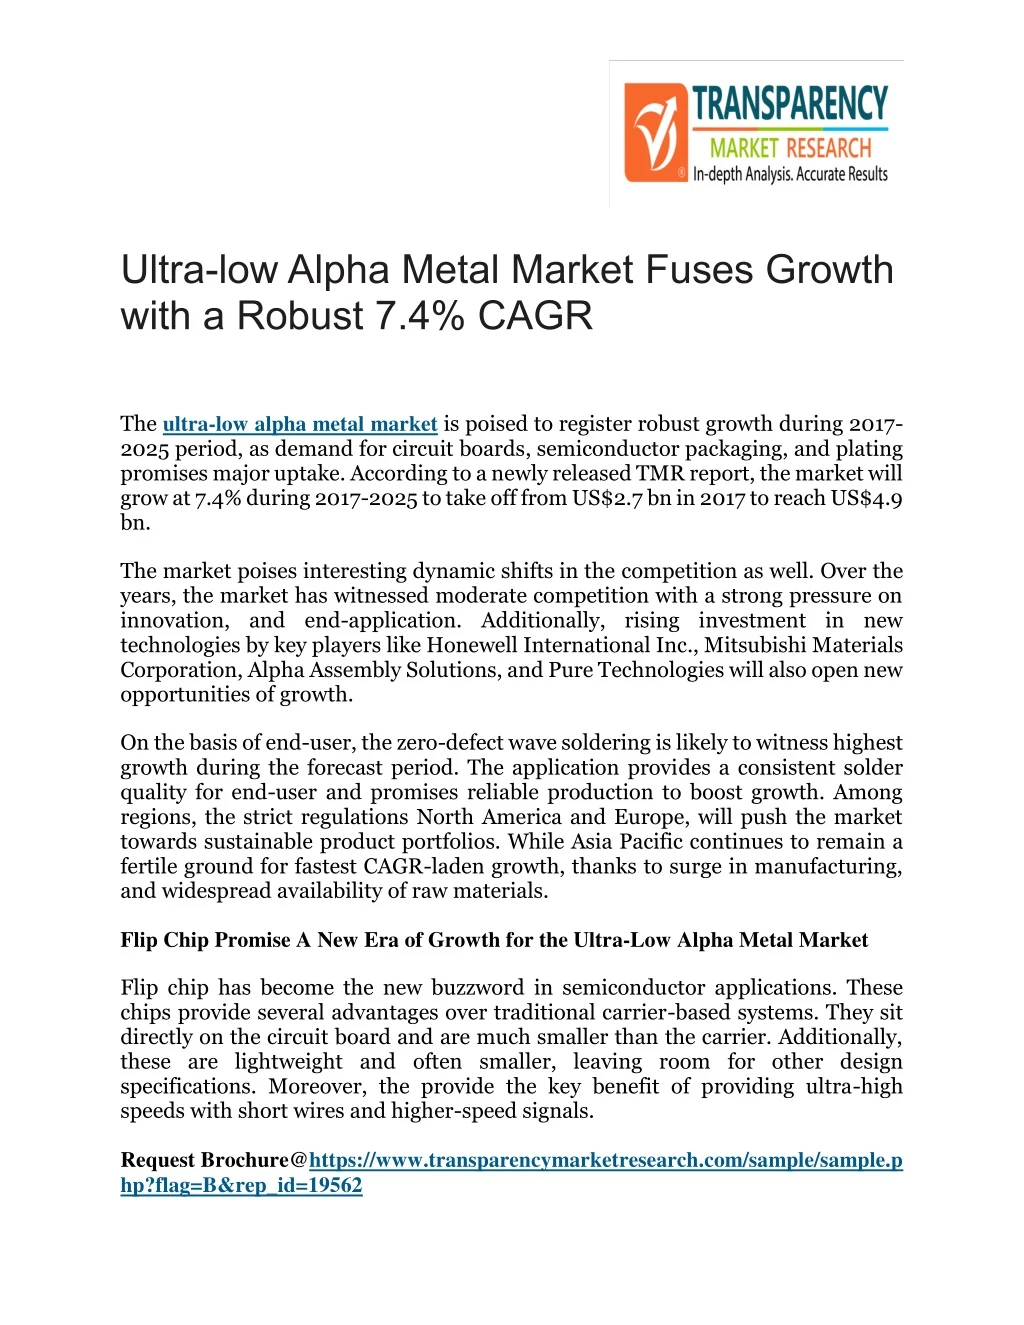 ultra low alpha metal market fuses growth with